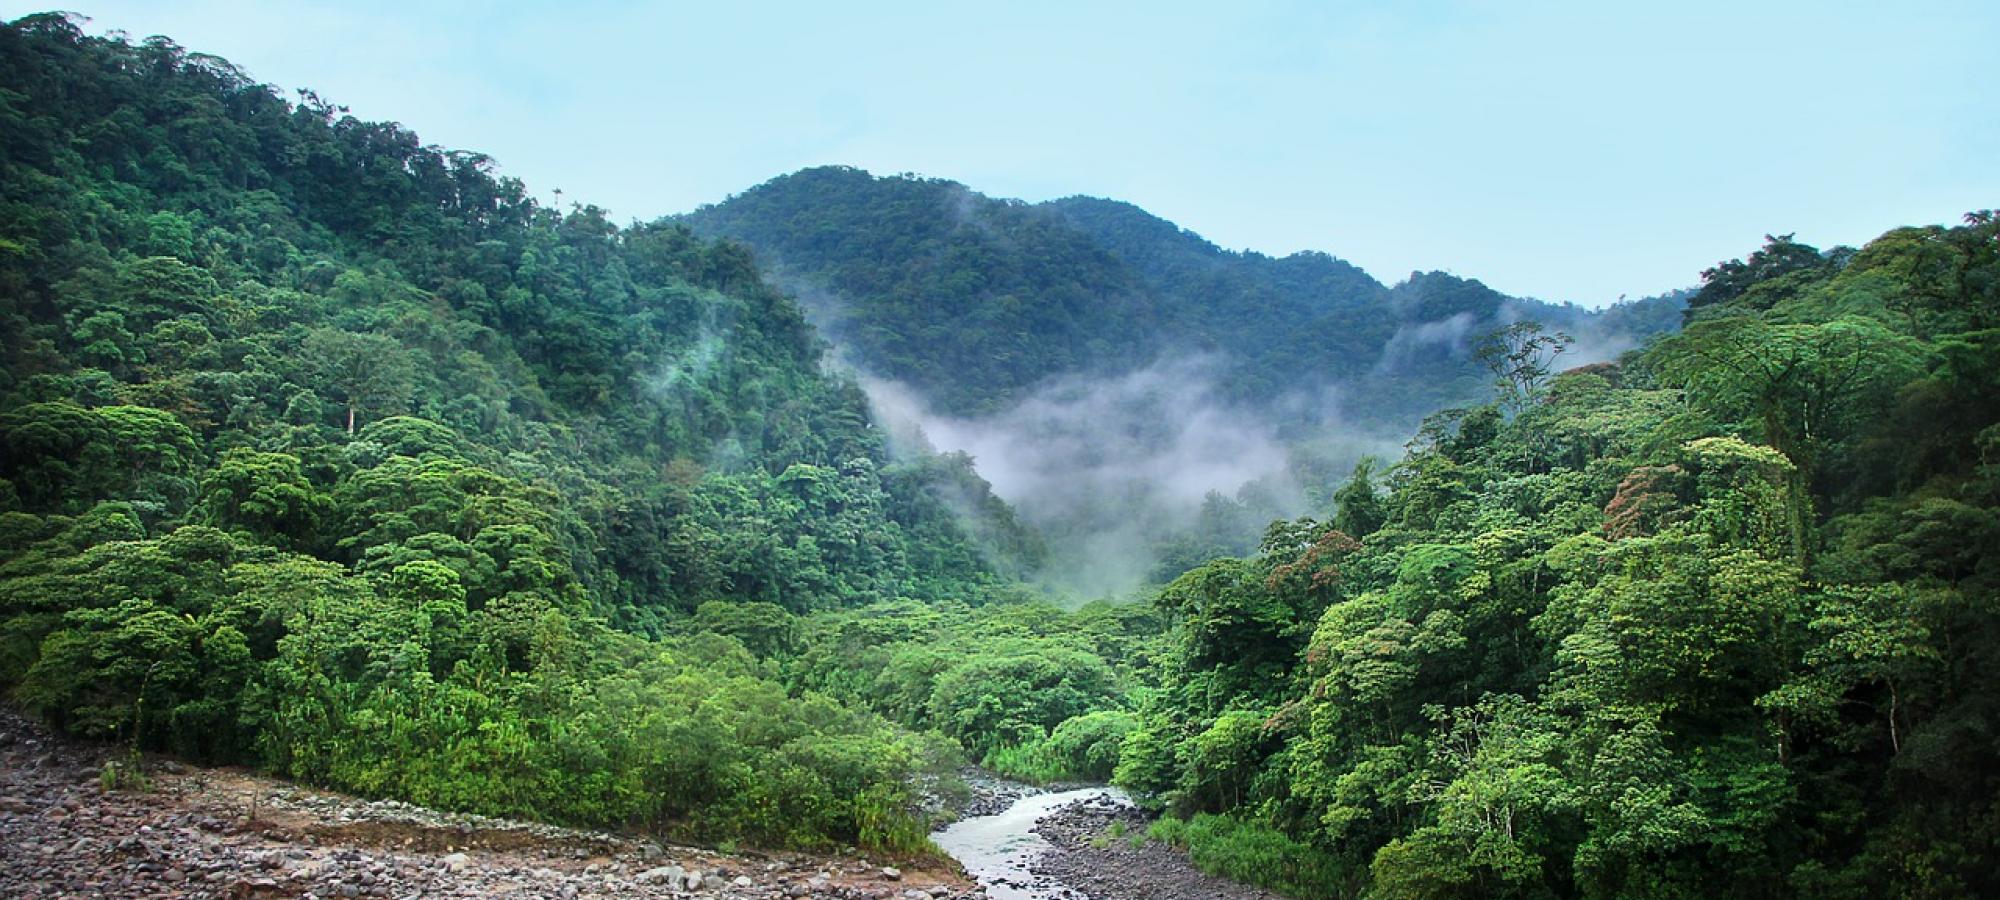 image of a rainforest